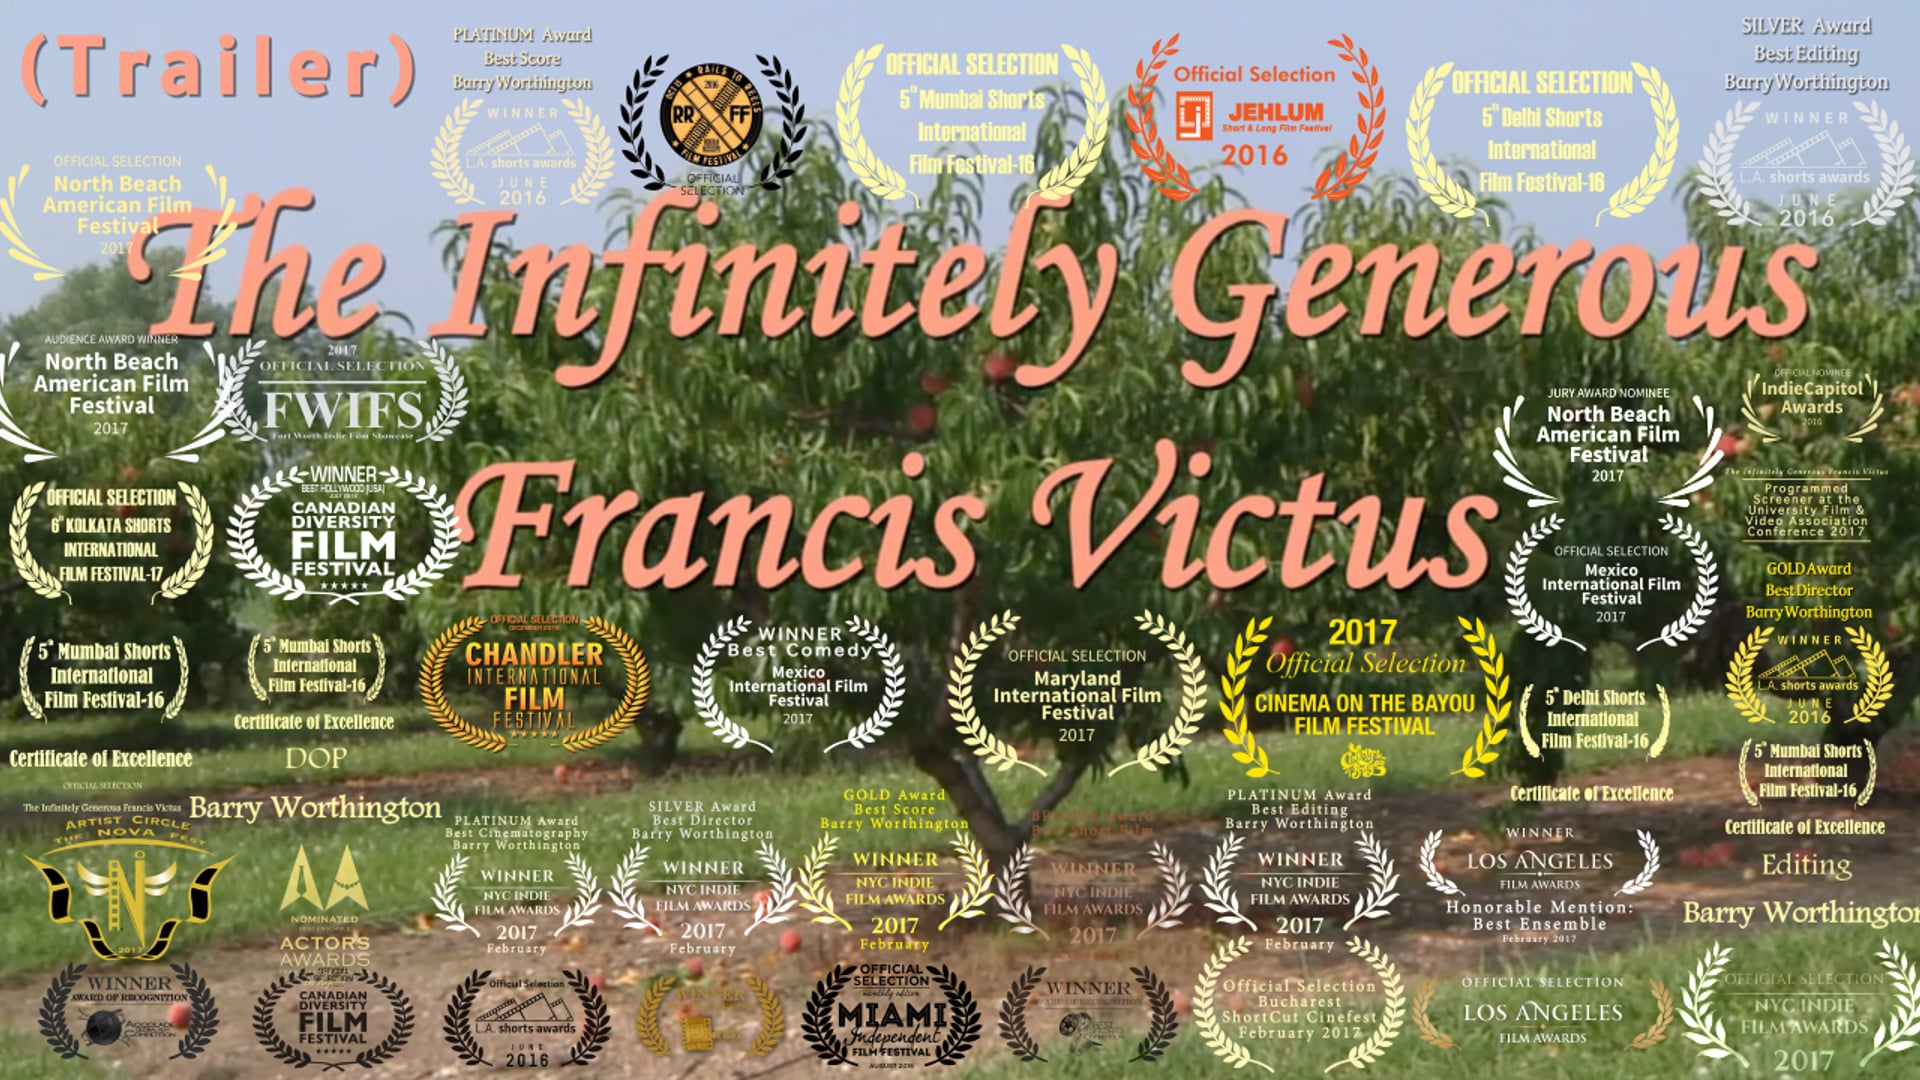 Official Trailer - The Infinitely Generous Francis Victus